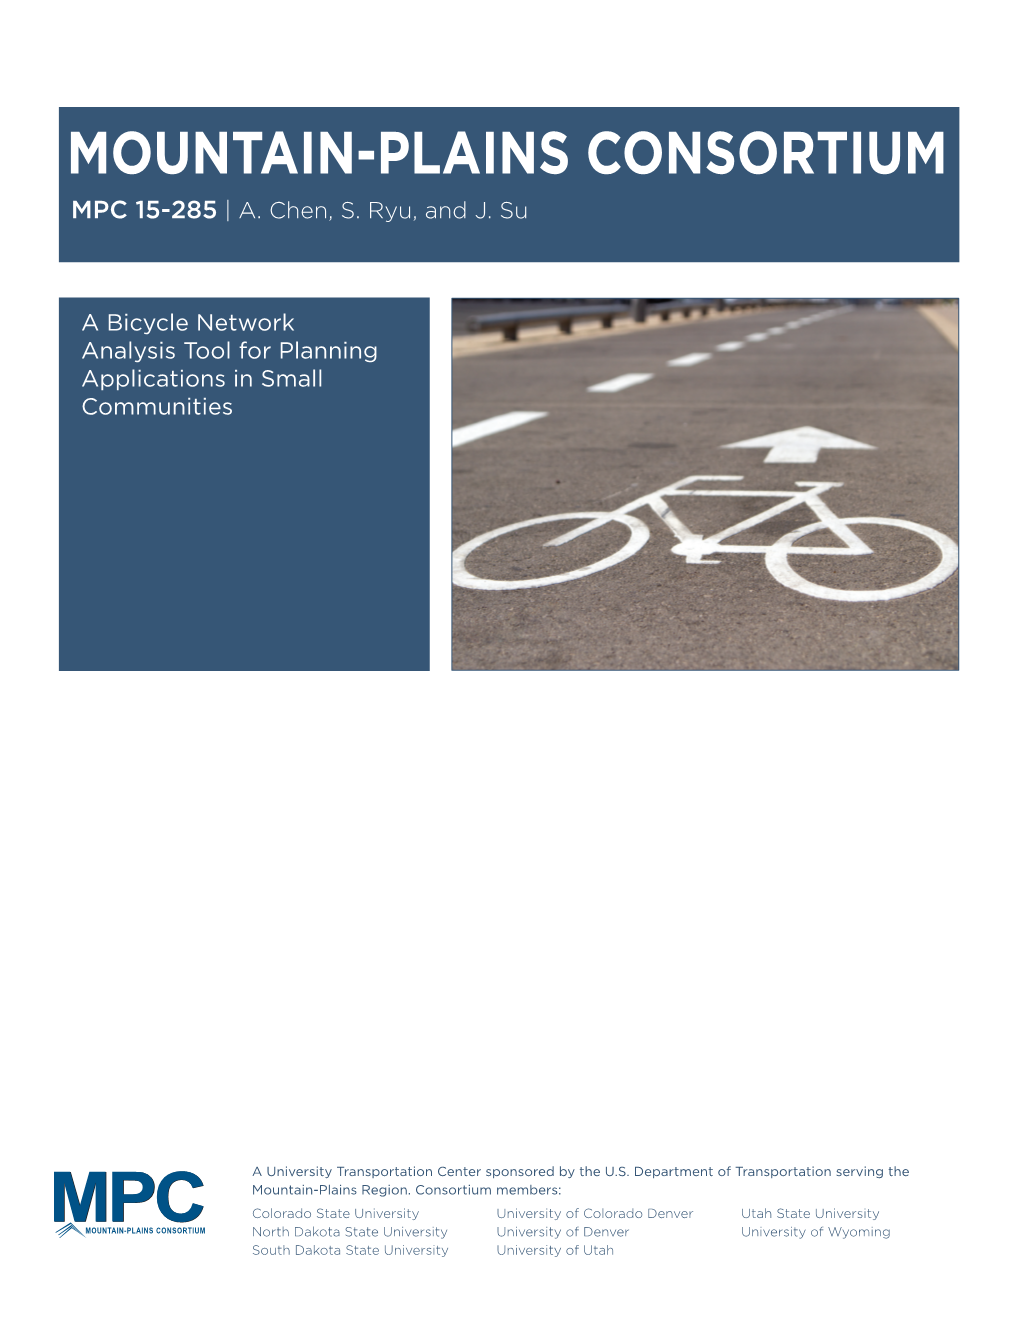 A Bicycle Network Analysis Tool for Planning Applications in Small Communities